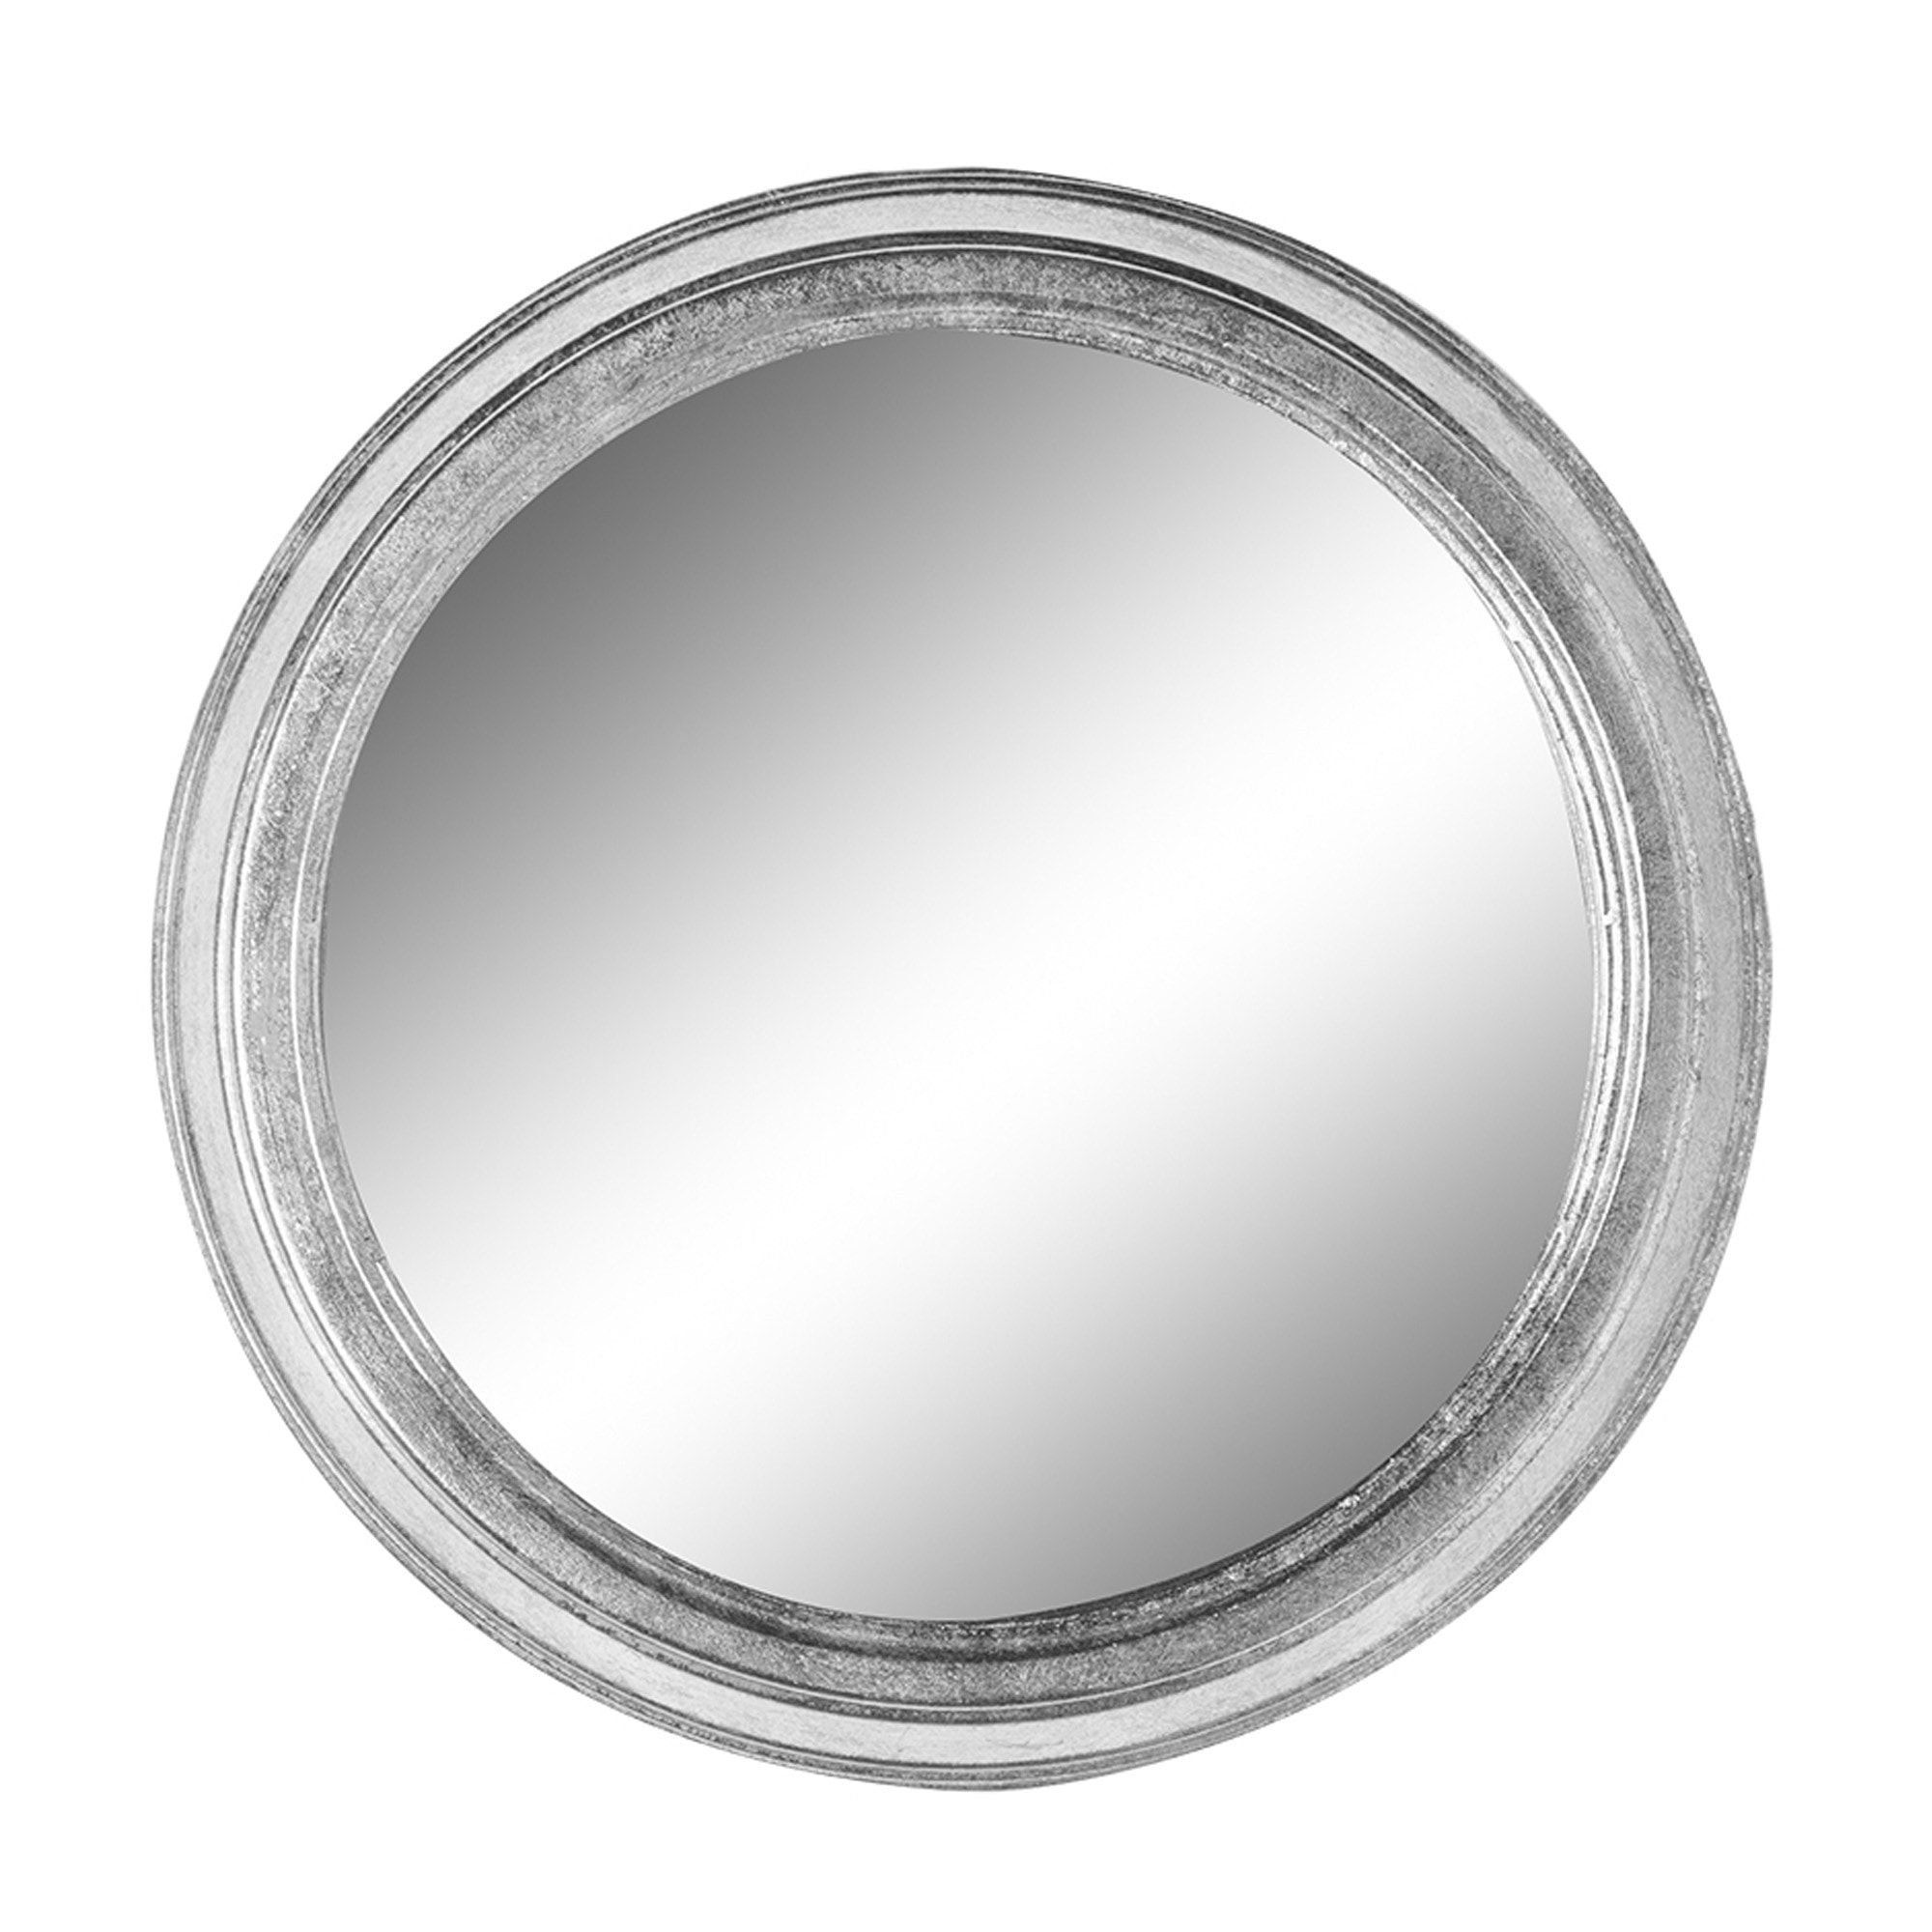 Large Silver Round Metal Wall Mirror | Wall Mirrors | Modern Mirrors Pertaining To Silver Leaf Round Wall Mirrors (View 7 of 15)